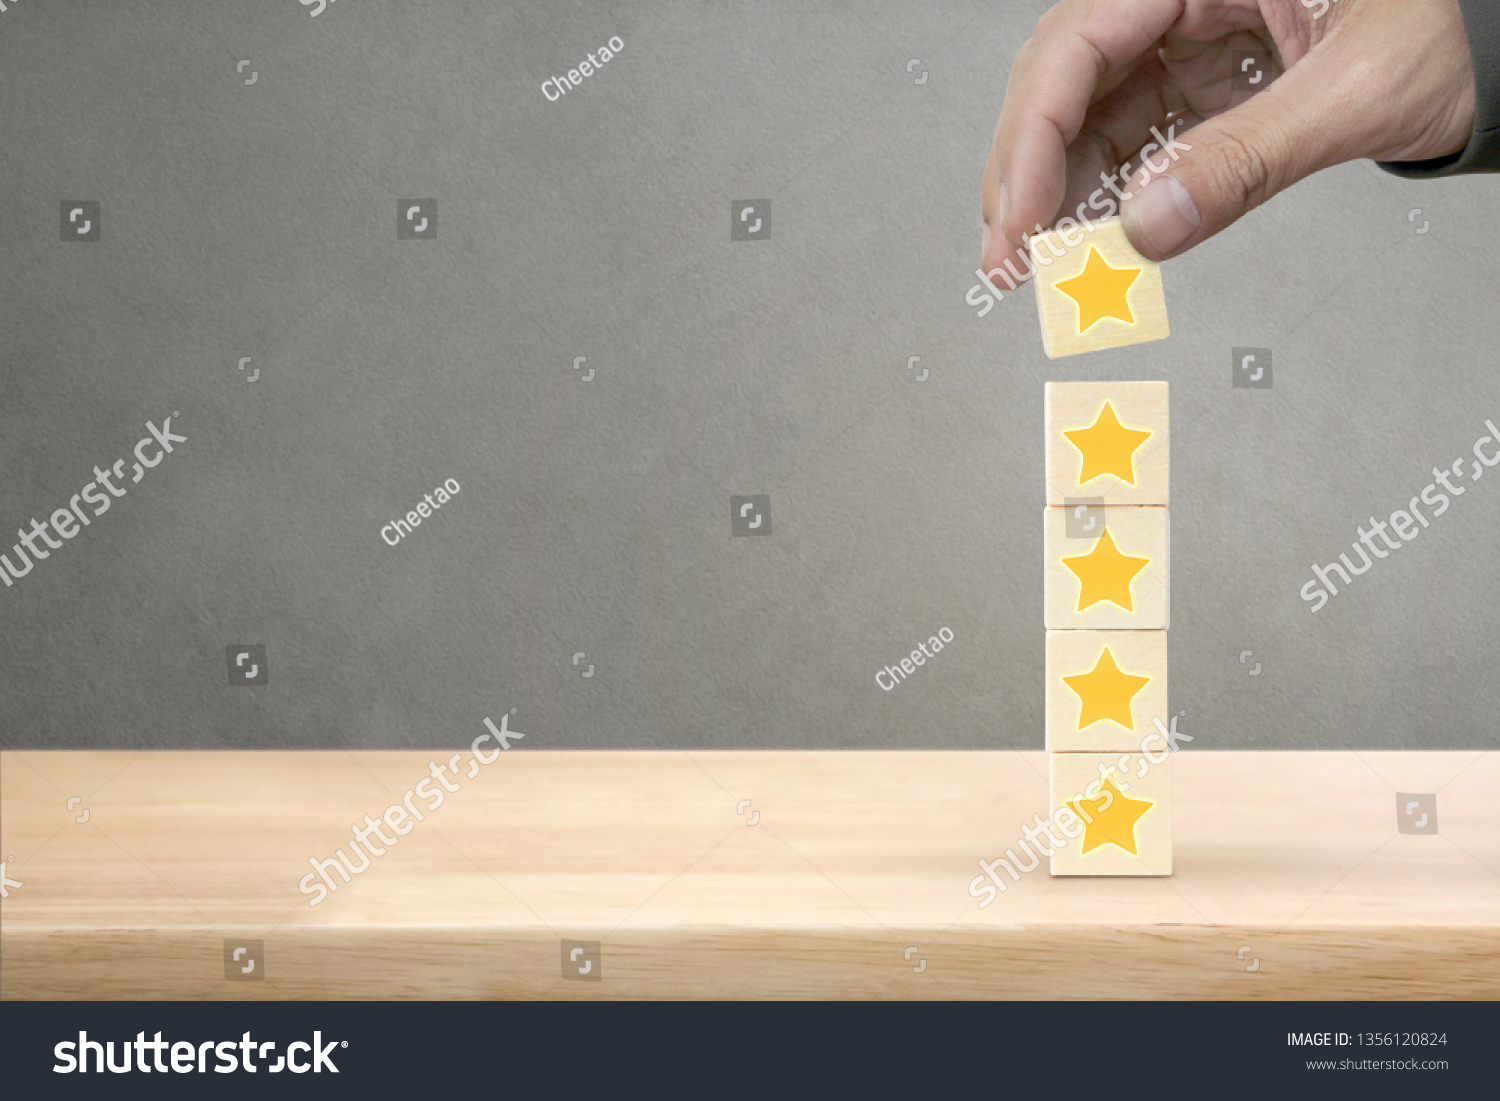 Hand arranging wood block stacking with icon five star symbol. Rating customer service satisfaction experience concept #1356120824